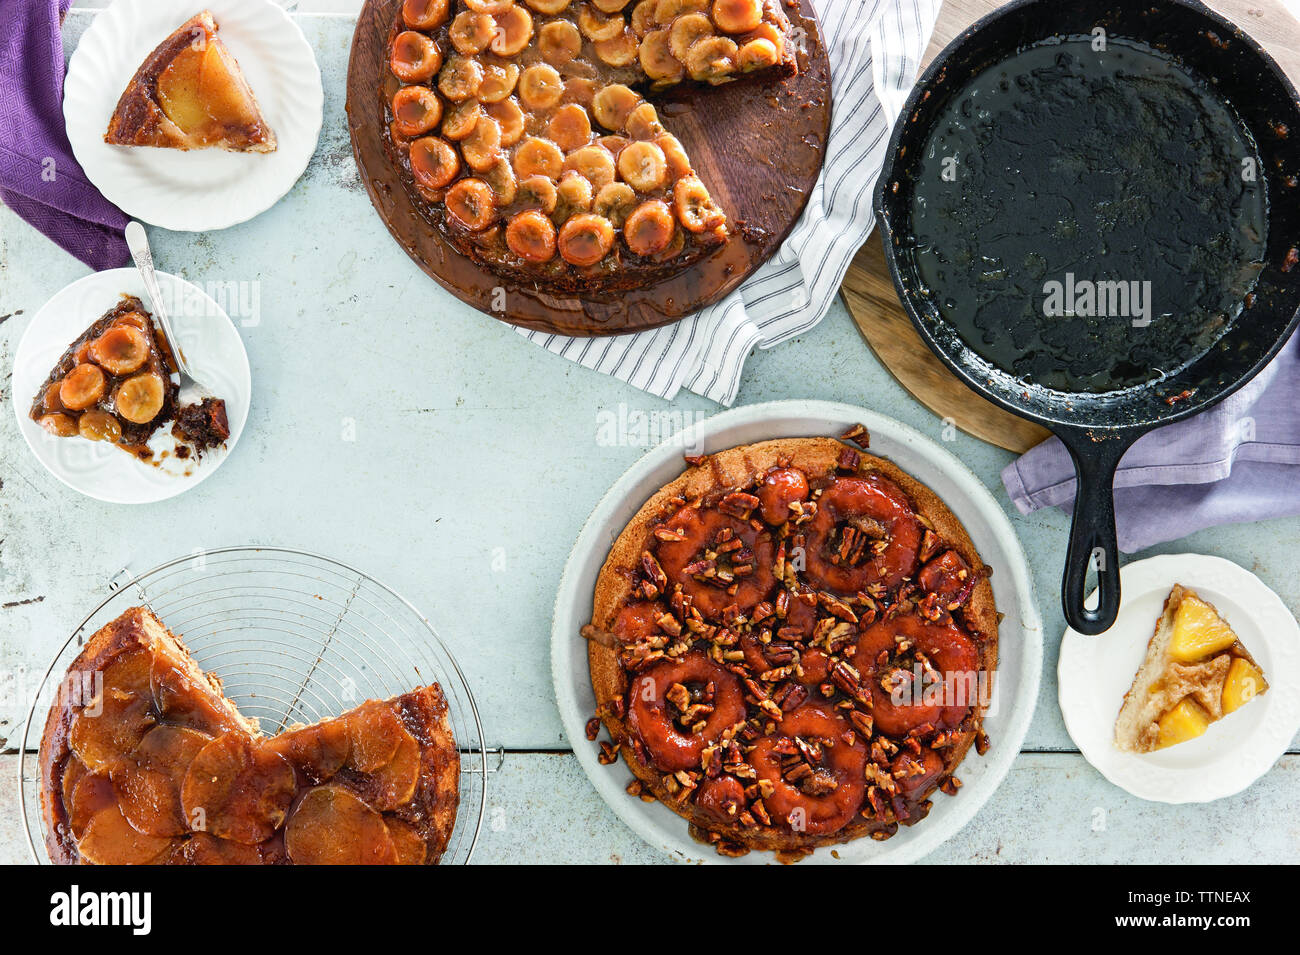 Overhead view of homemade desserts on table Stock Photo